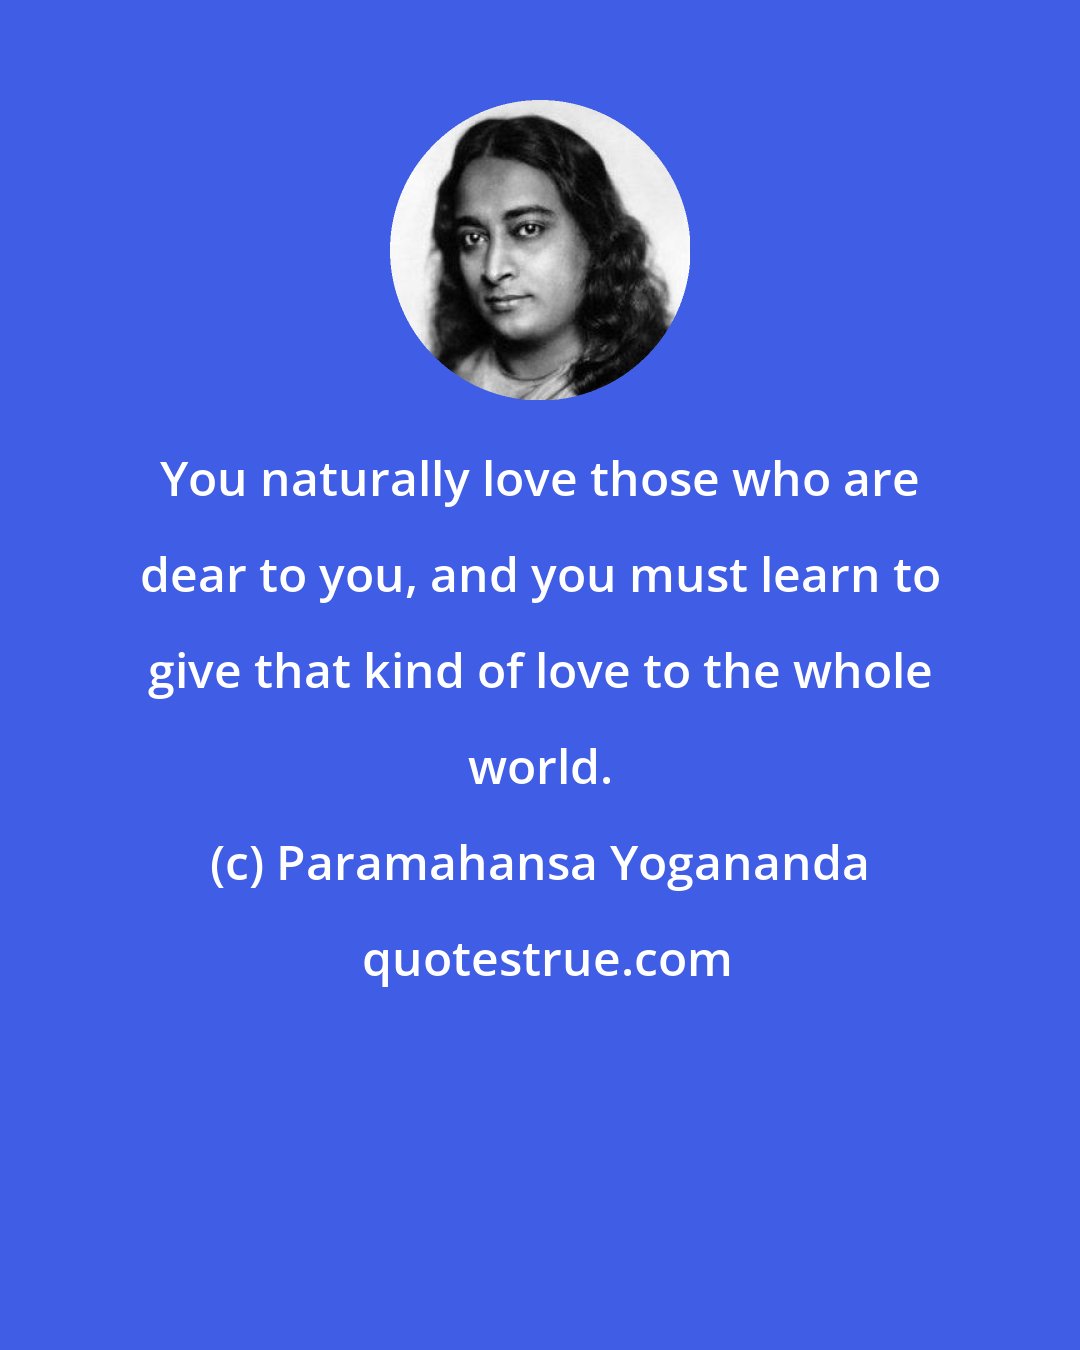 Paramahansa Yogananda: You naturally love those who are dear to you, and you must learn to give that kind of love to the whole world.